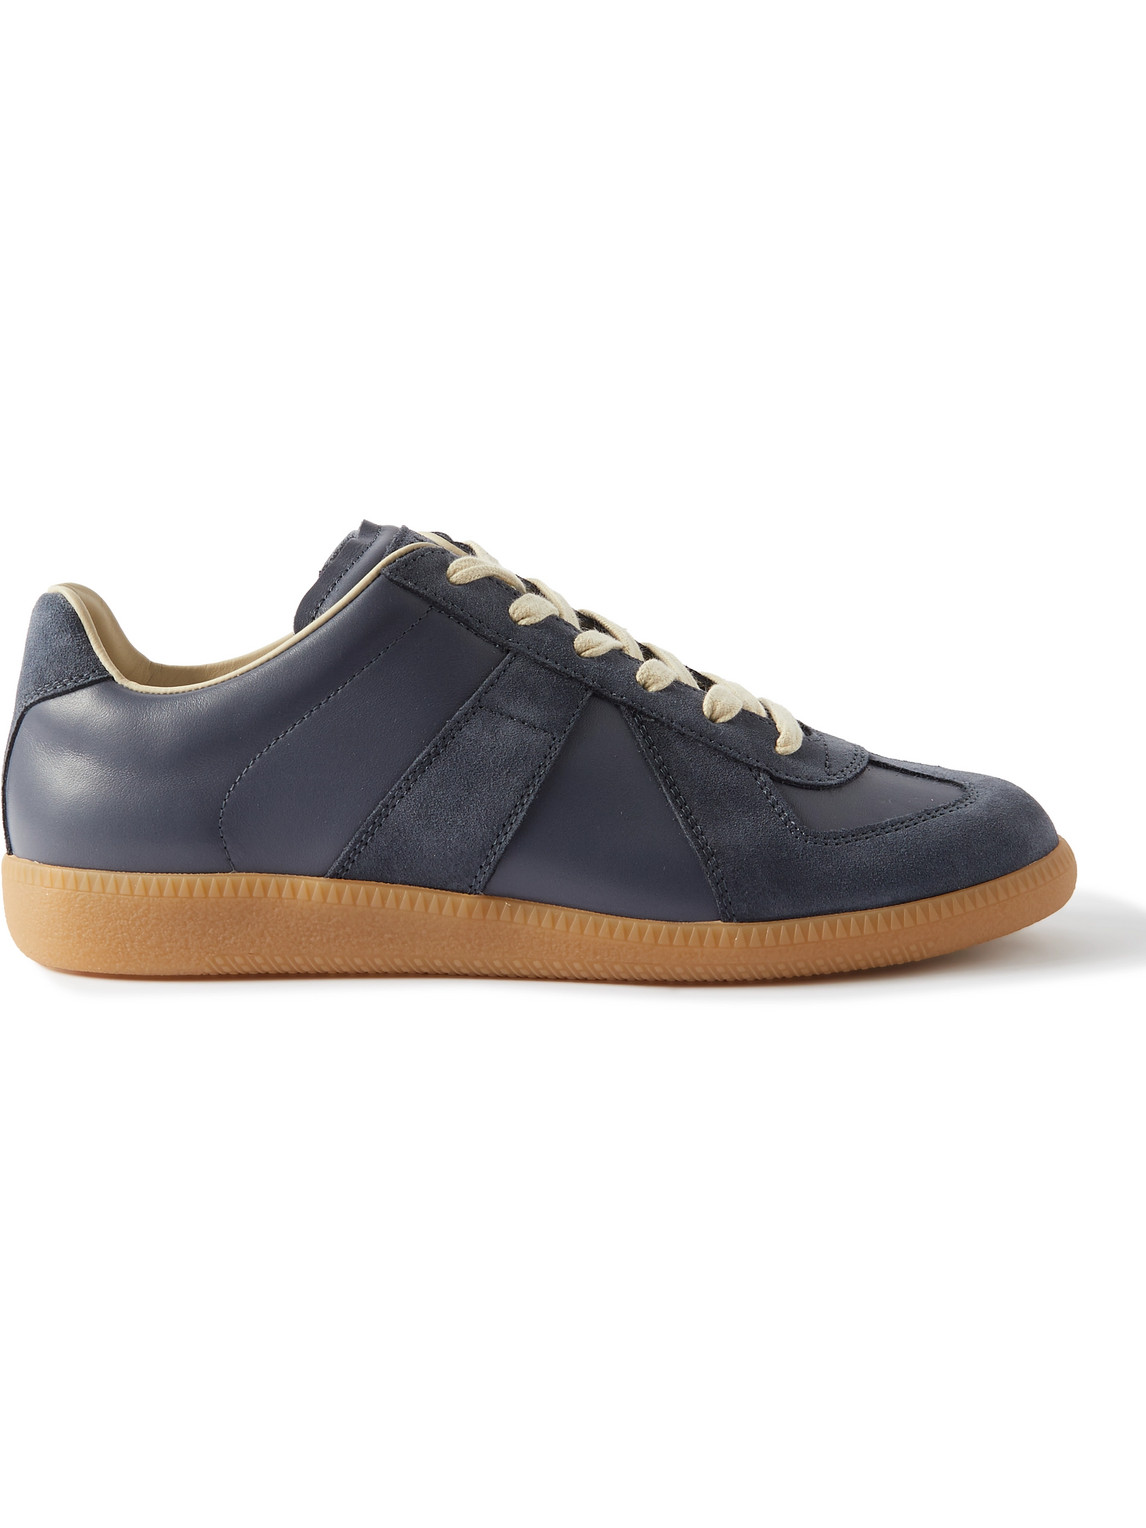 Maison Margiela Replica Leather And Suede Trainers In Blue